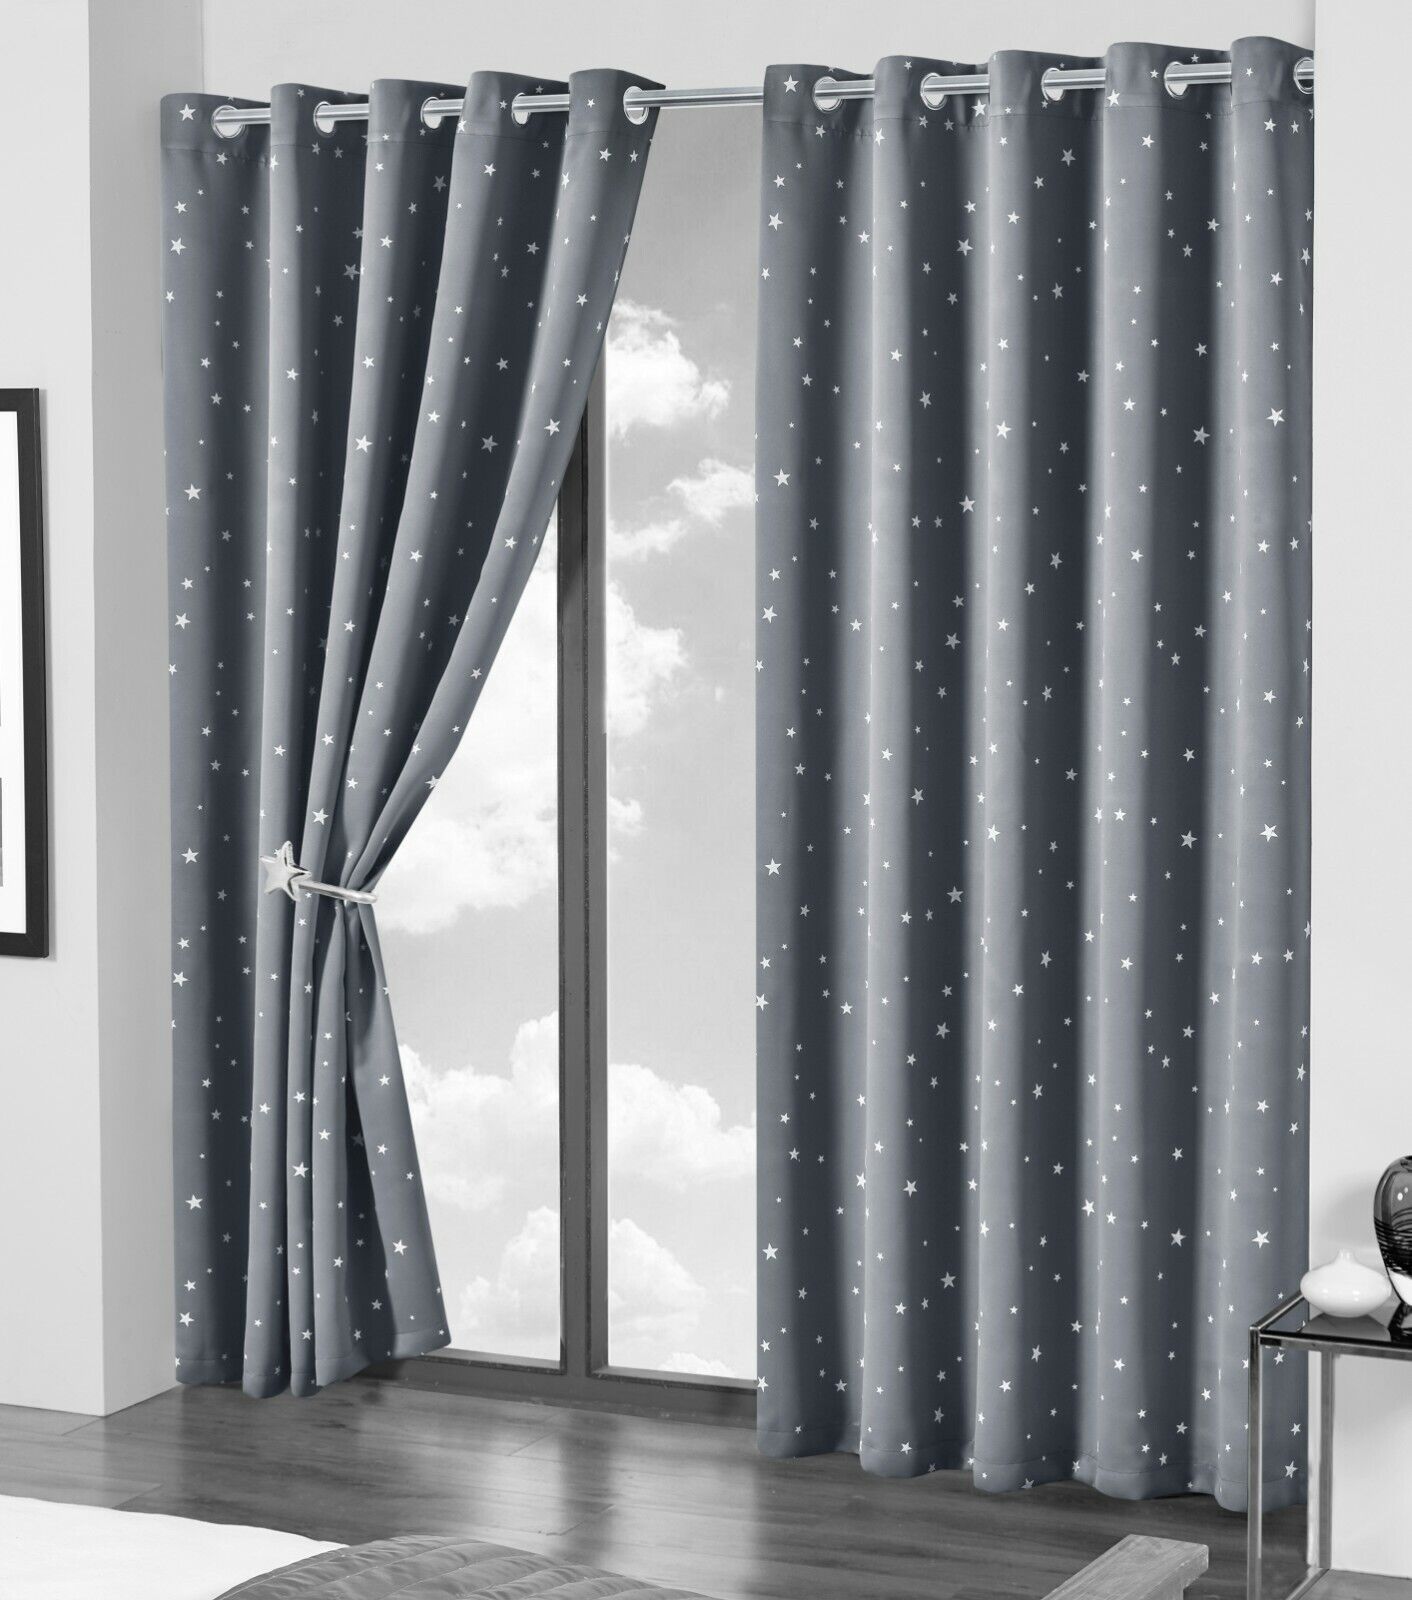 Modern Elegance: The Beauty of Contemporary Faux Silk Eyelet Curtains